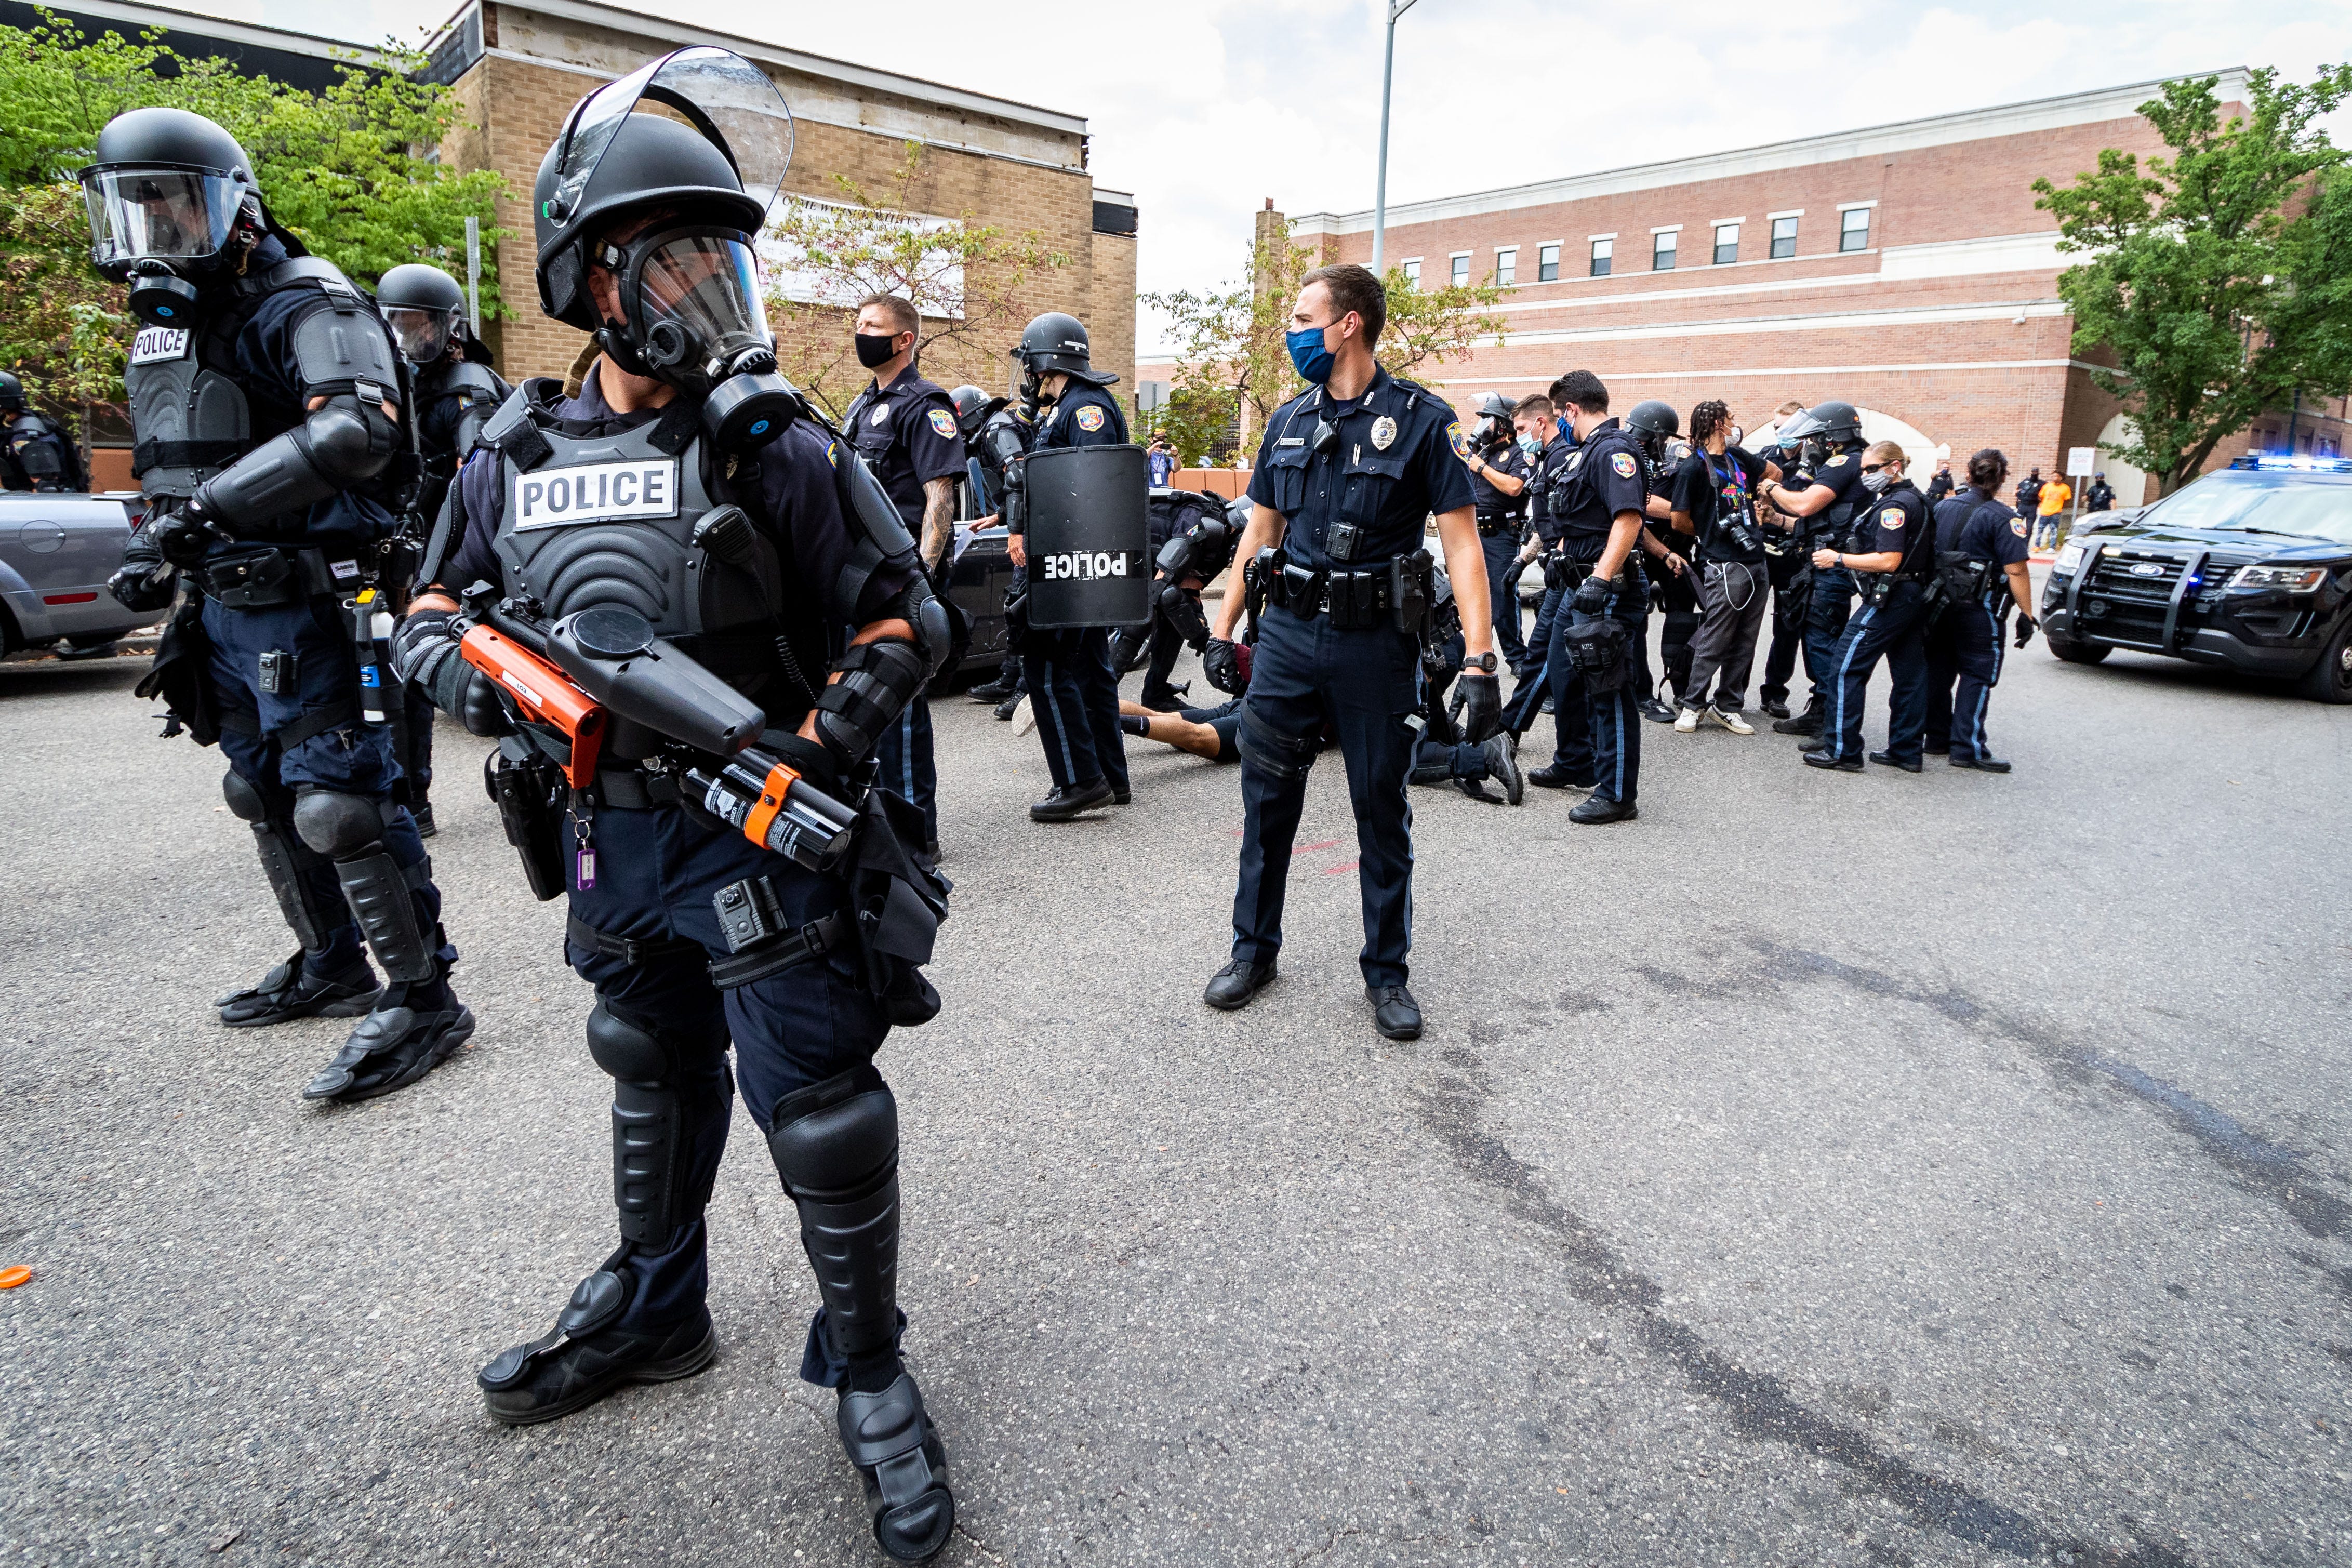 Kalamazoo Police arrest a counter-protestor. Members of Proud Boys, antifa, and a local church clash with each other and local and Michigan State Police at Arcadia Creek Festival Plaza in Kalamazoo on August 15, 2020.